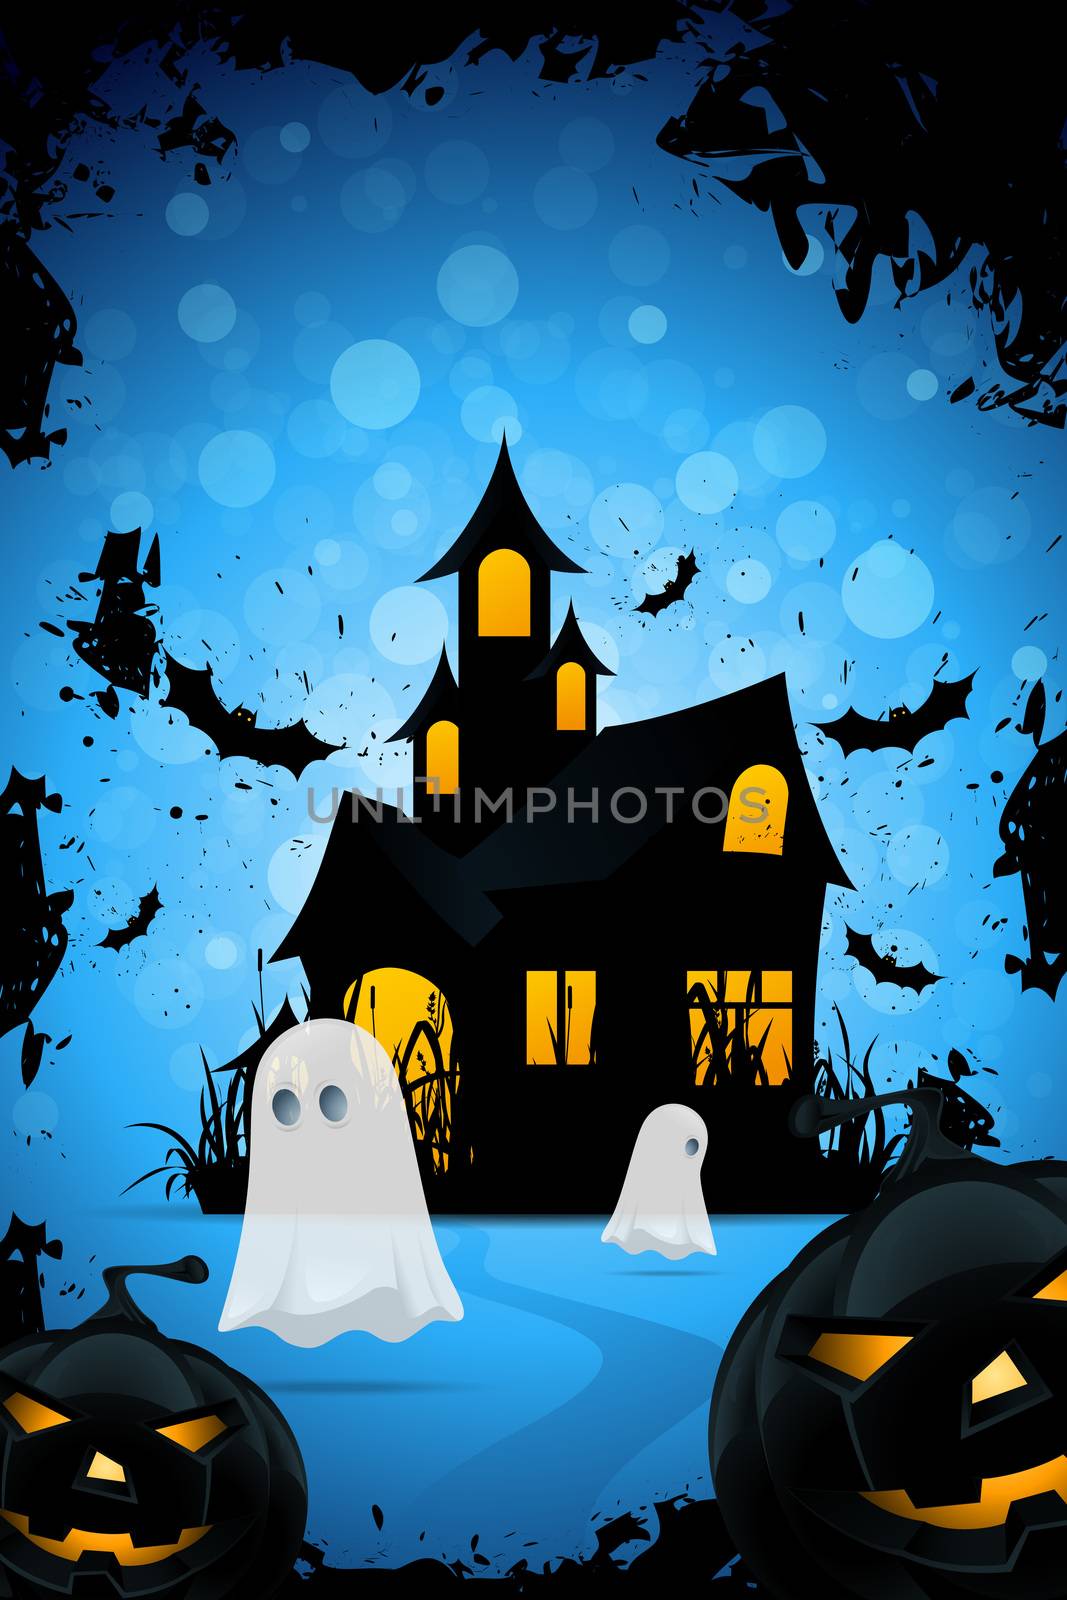 Halloween Background with Haunted House, Pumpkins and Ghosts by WaD